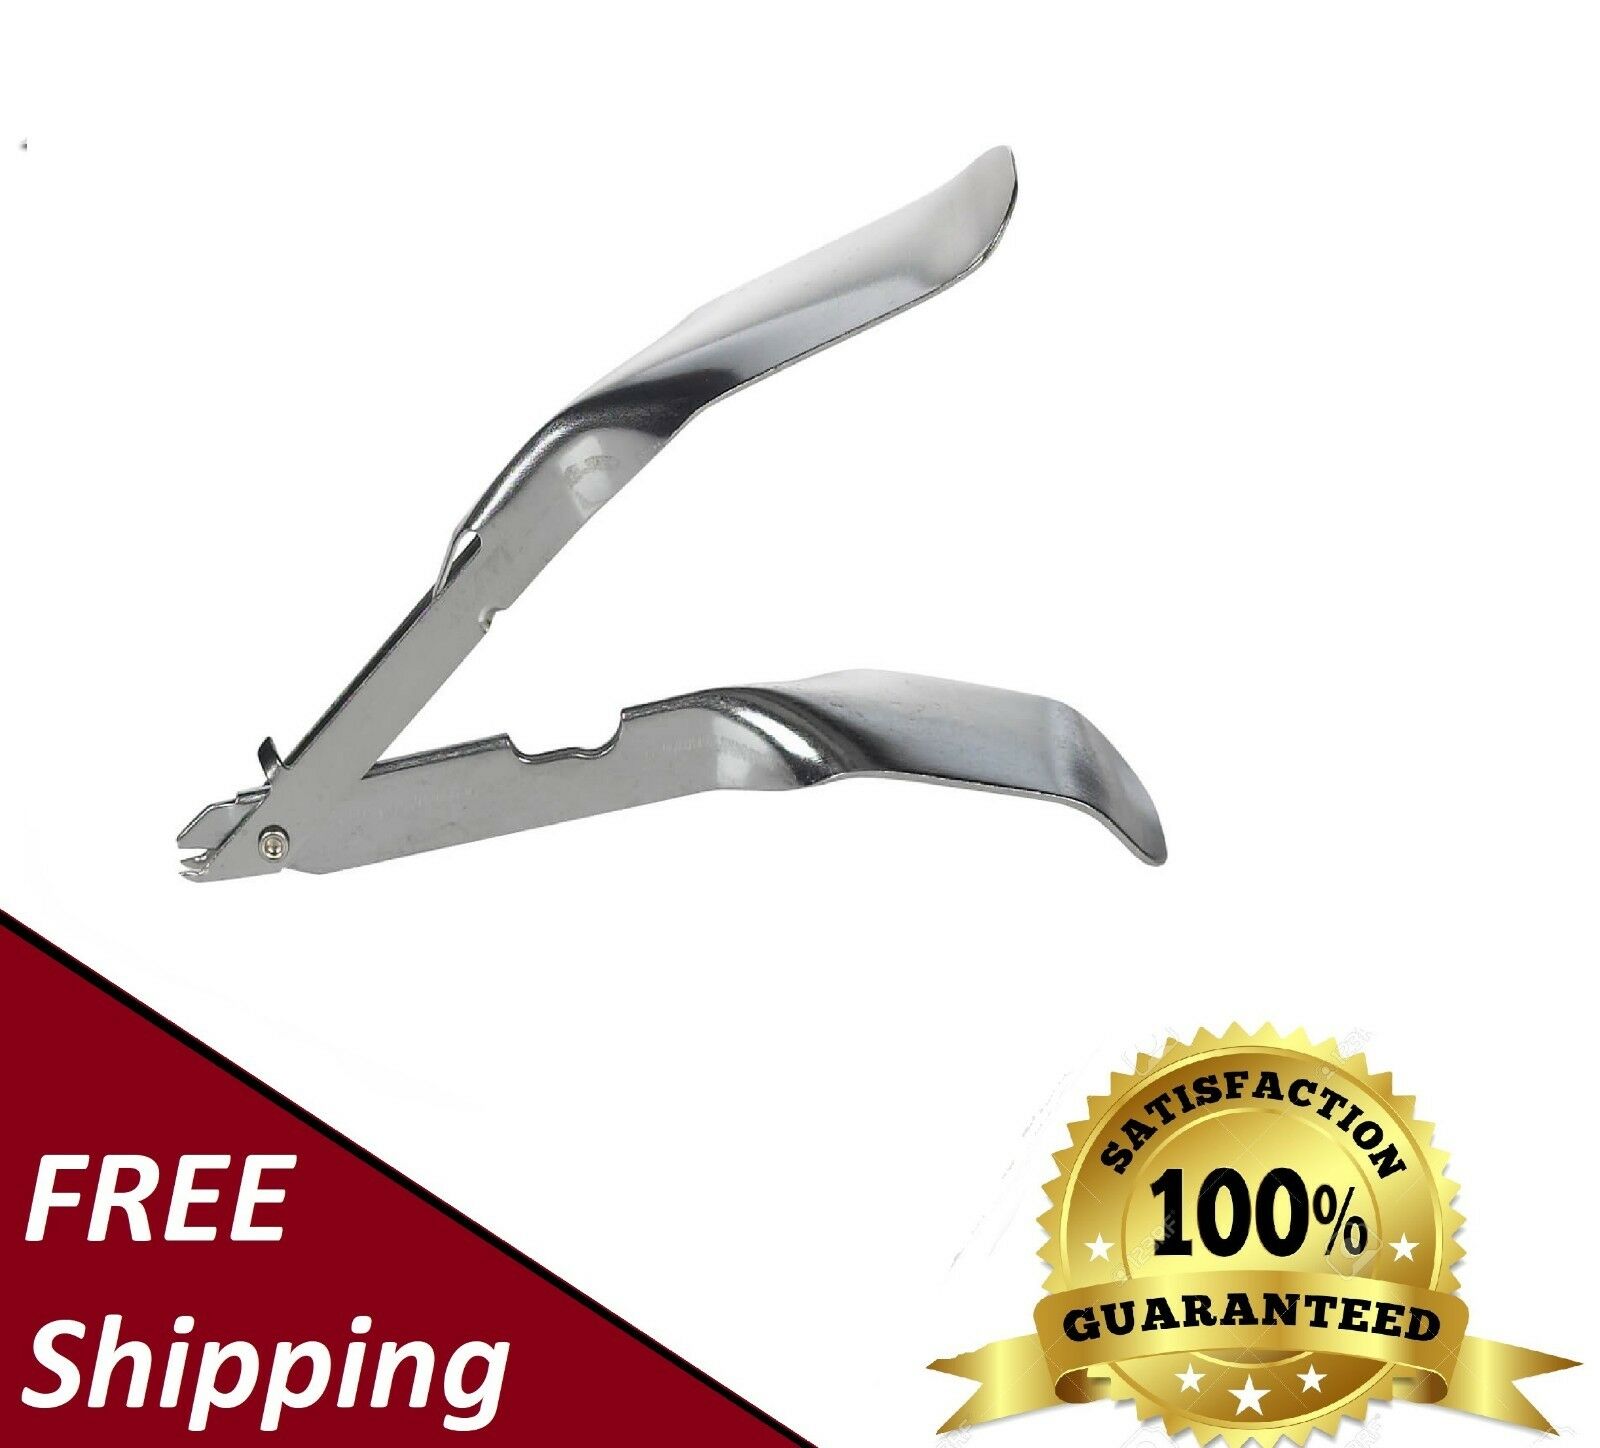 New Surgical Skin Staple Remover Disposable Free Shipping